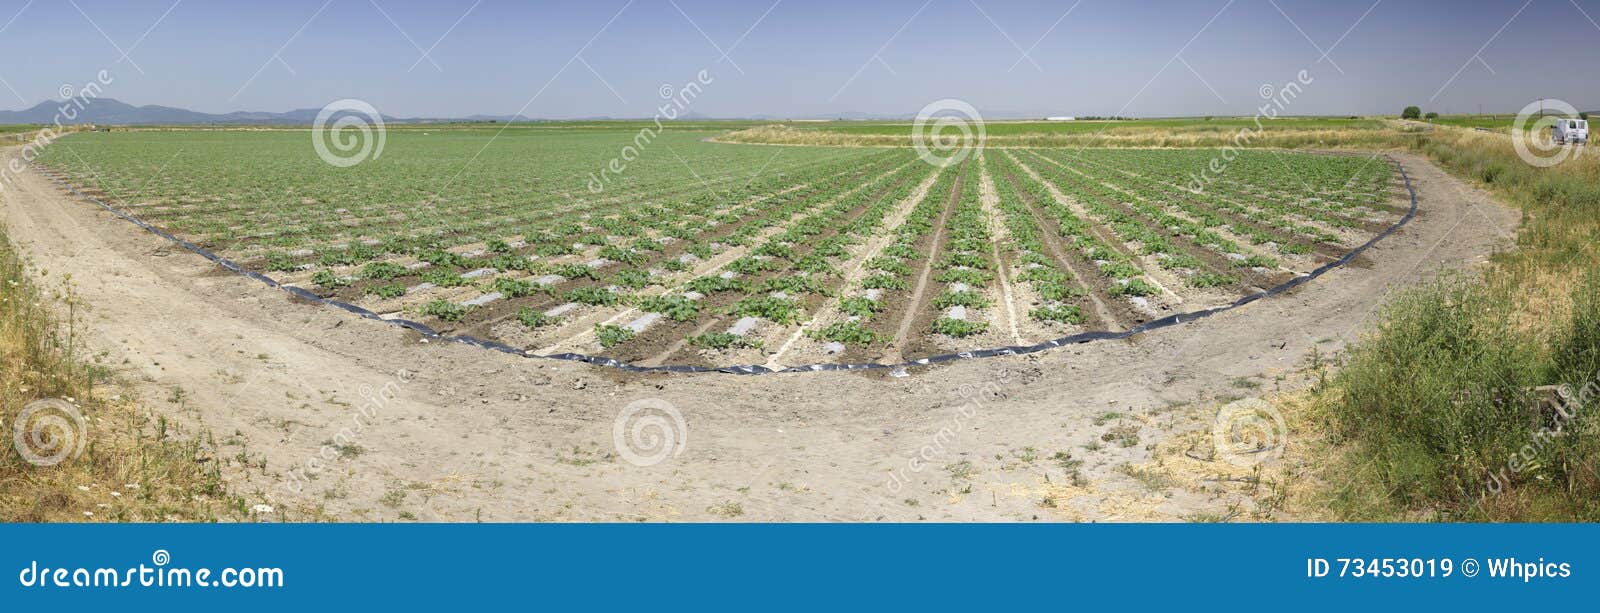 young watermelon field, extremadura, spain